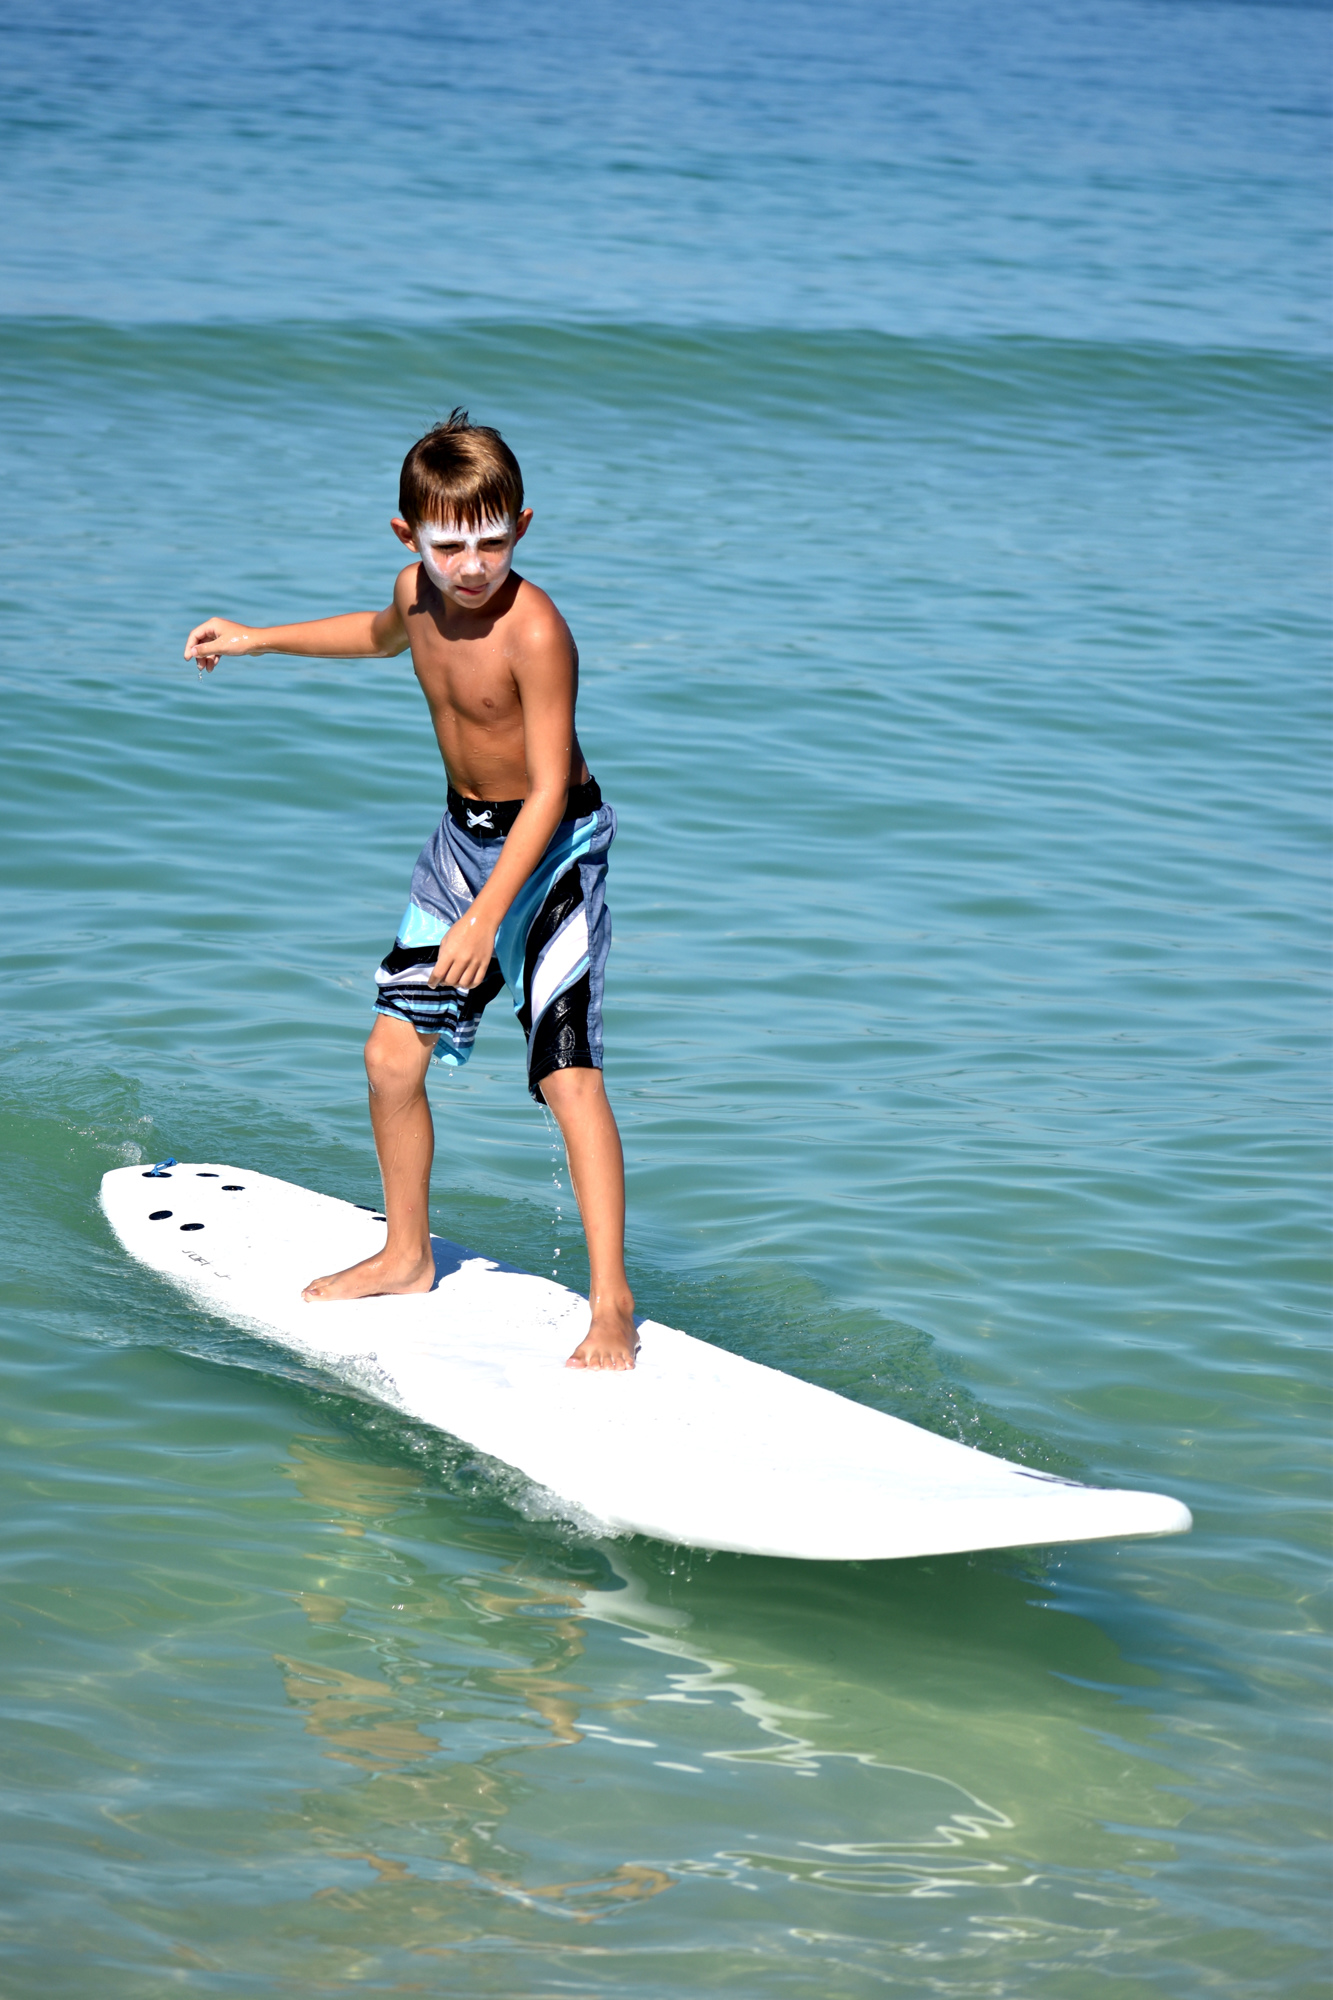 Connor Helrigle during Sarasota County’s Skim, Surf and Paddle Camp in 2017.